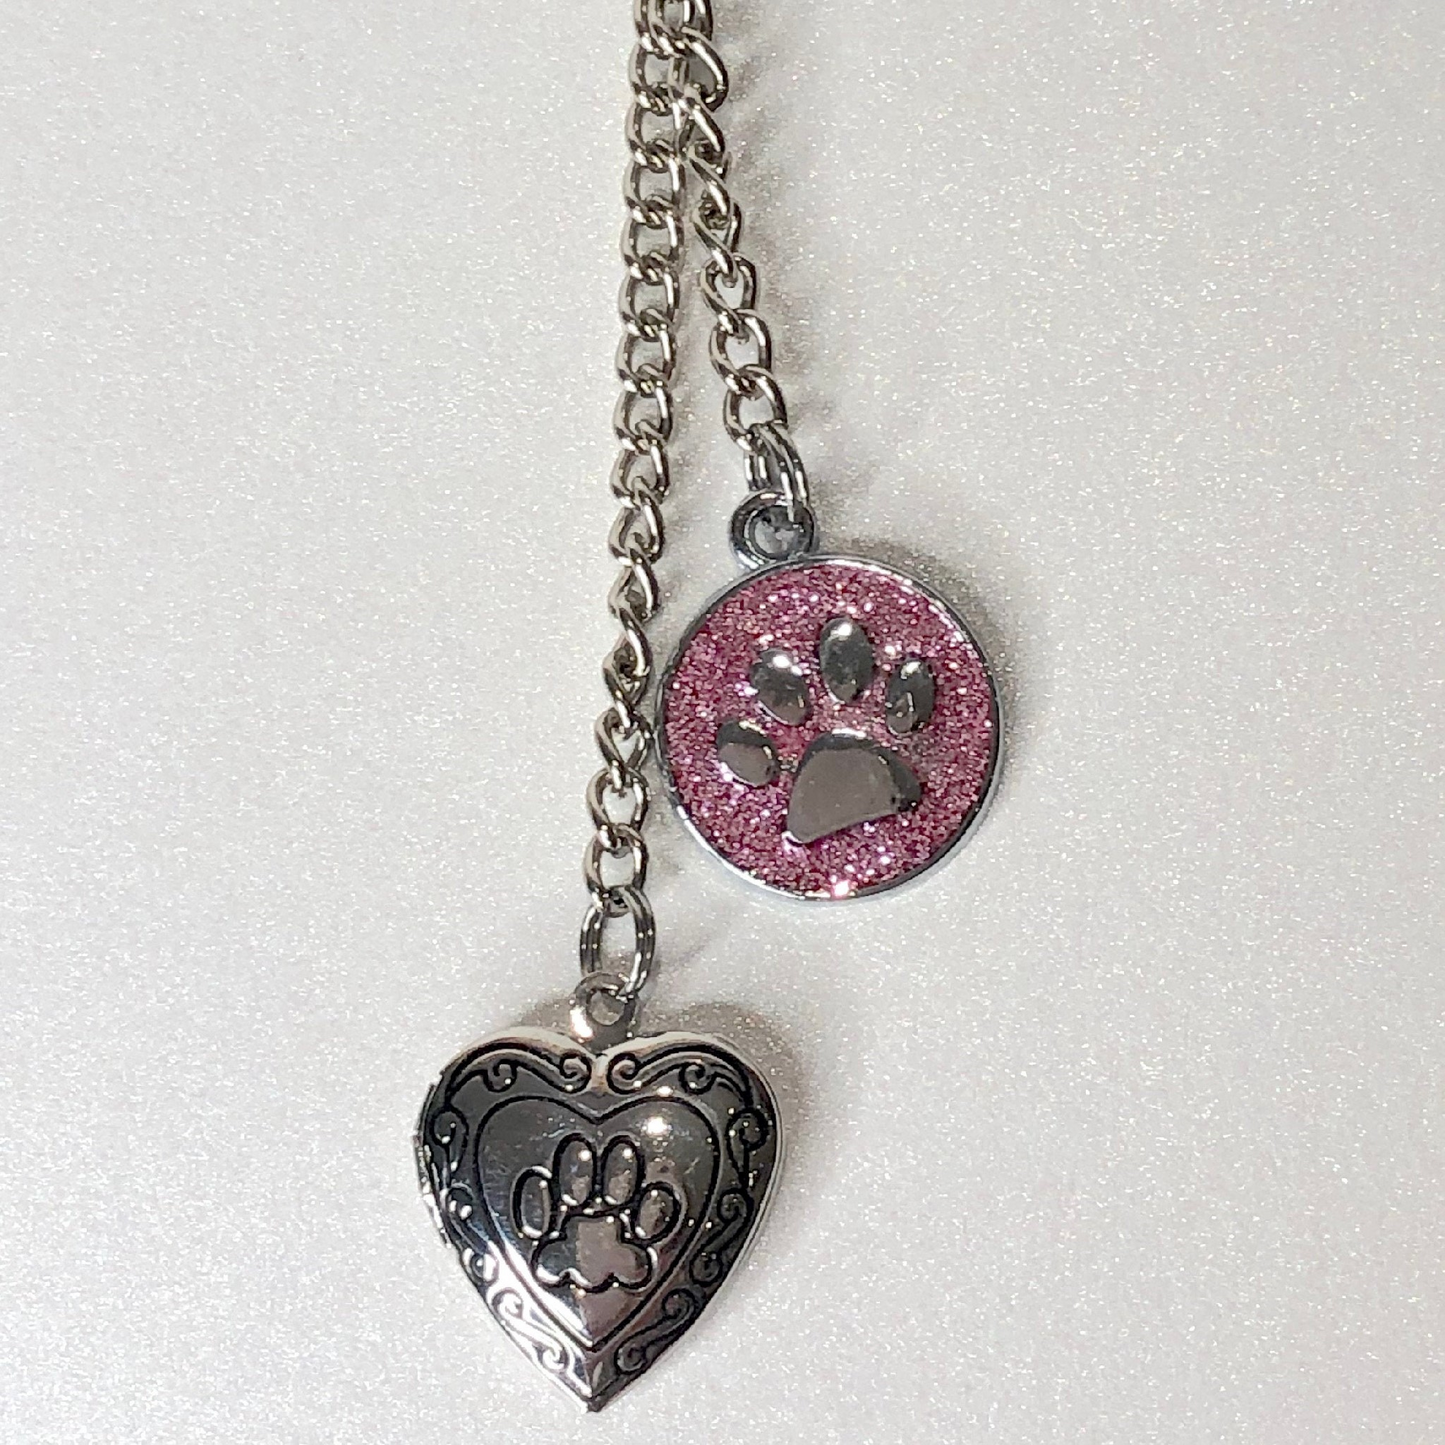 Heart shaped locket with paw print is teamed with a pink glitter charm, also with a paw print, part of the pet memorial keyring